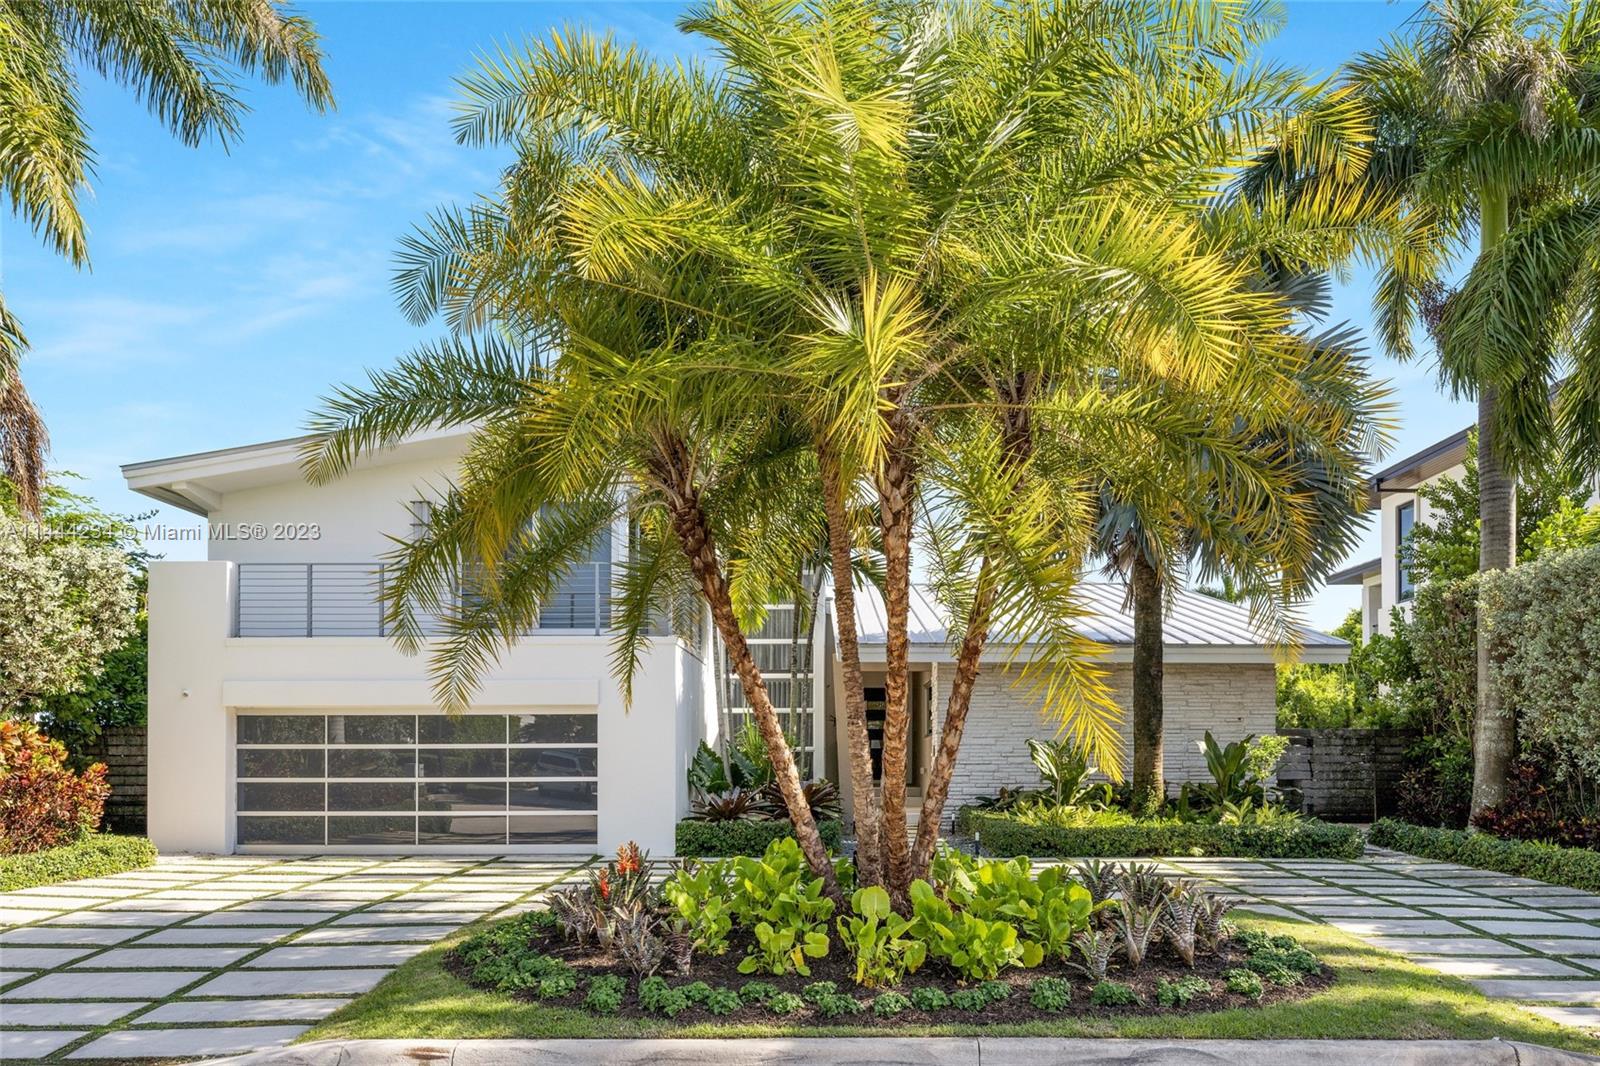 Incredible Mimo home in sought after Bay Harbor Islands! This 4,548 SF home was
completely rebuilt in 2011. This home features 5 spacious bedrooms, 5 and a half bathrooms, Sonos surround sound speakers, a large eat in kitchen and much more! Double height glass walls in family room drench the house in natural light. Vaulted ceilings with sky lights in living room. Gorgeous Van Kir pool creates for a backyard oasis.
Located on a quiet street just blocks from Bal Harbour Shops, parks & playgrounds, Ruth K. Broad A+ school, houses of worship and the beach.